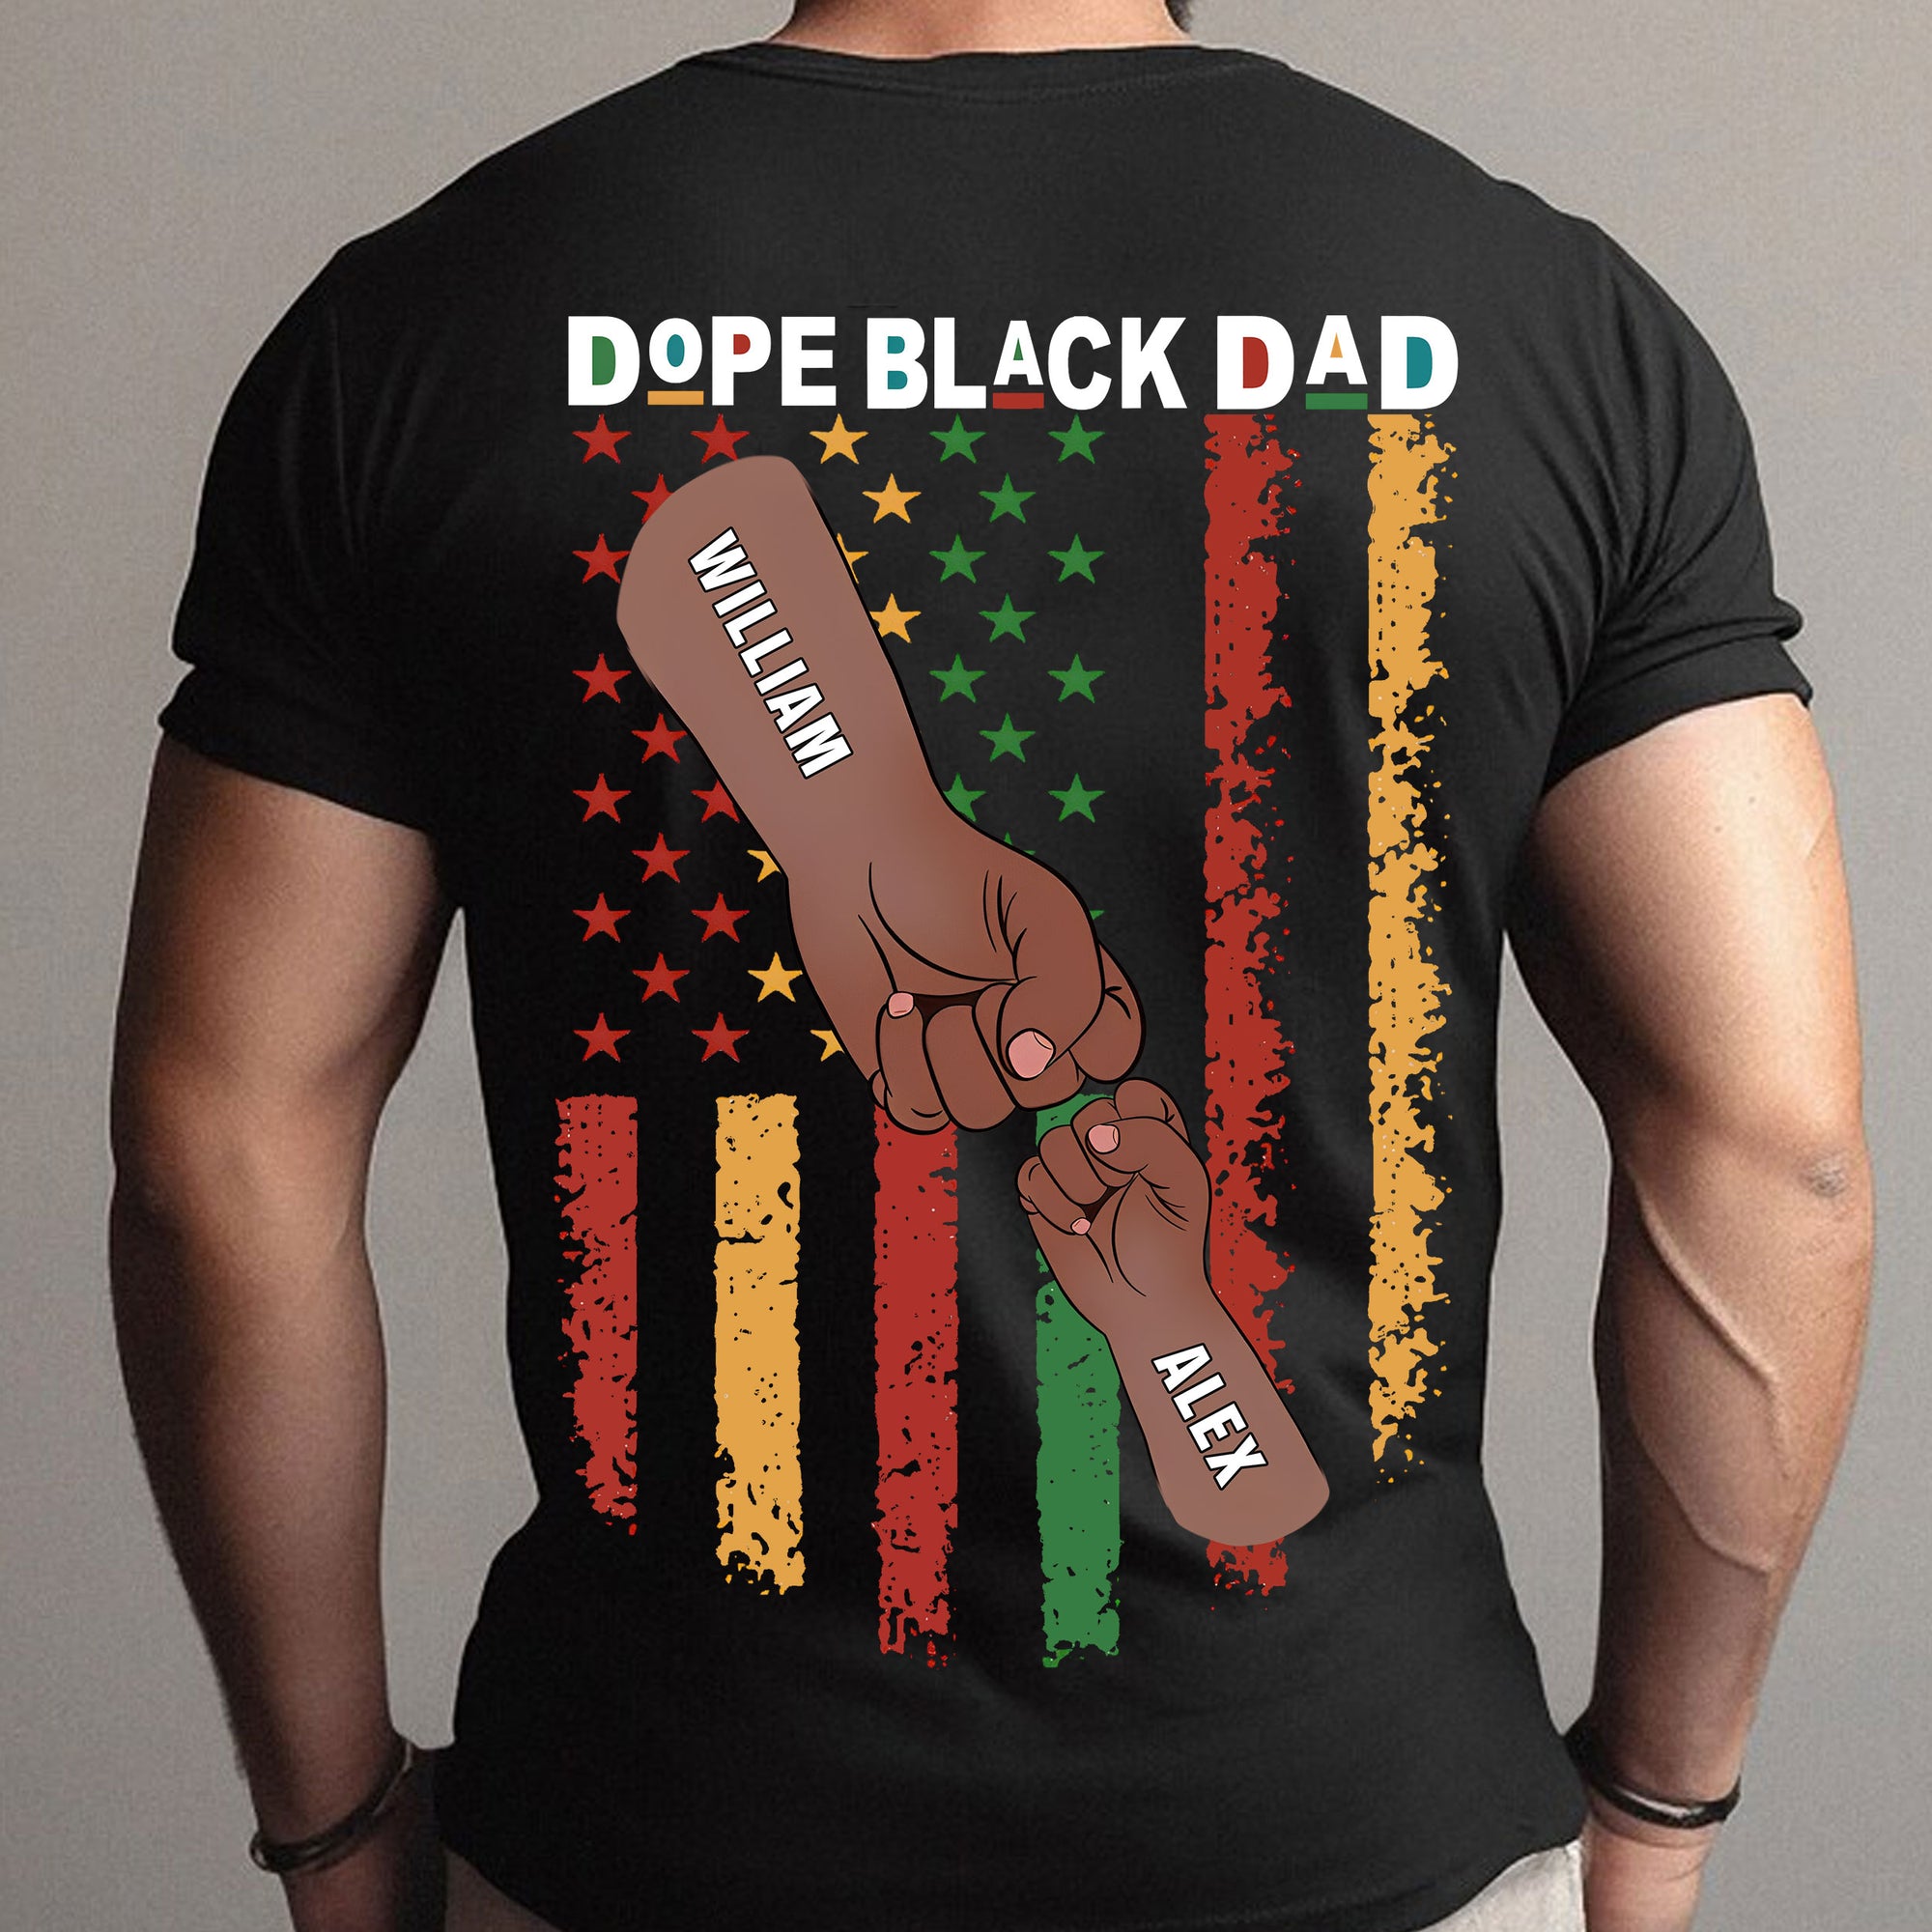 Dope Black Dad Hand Family - Personalized T-Shirt, Gift For Family, Father's Day